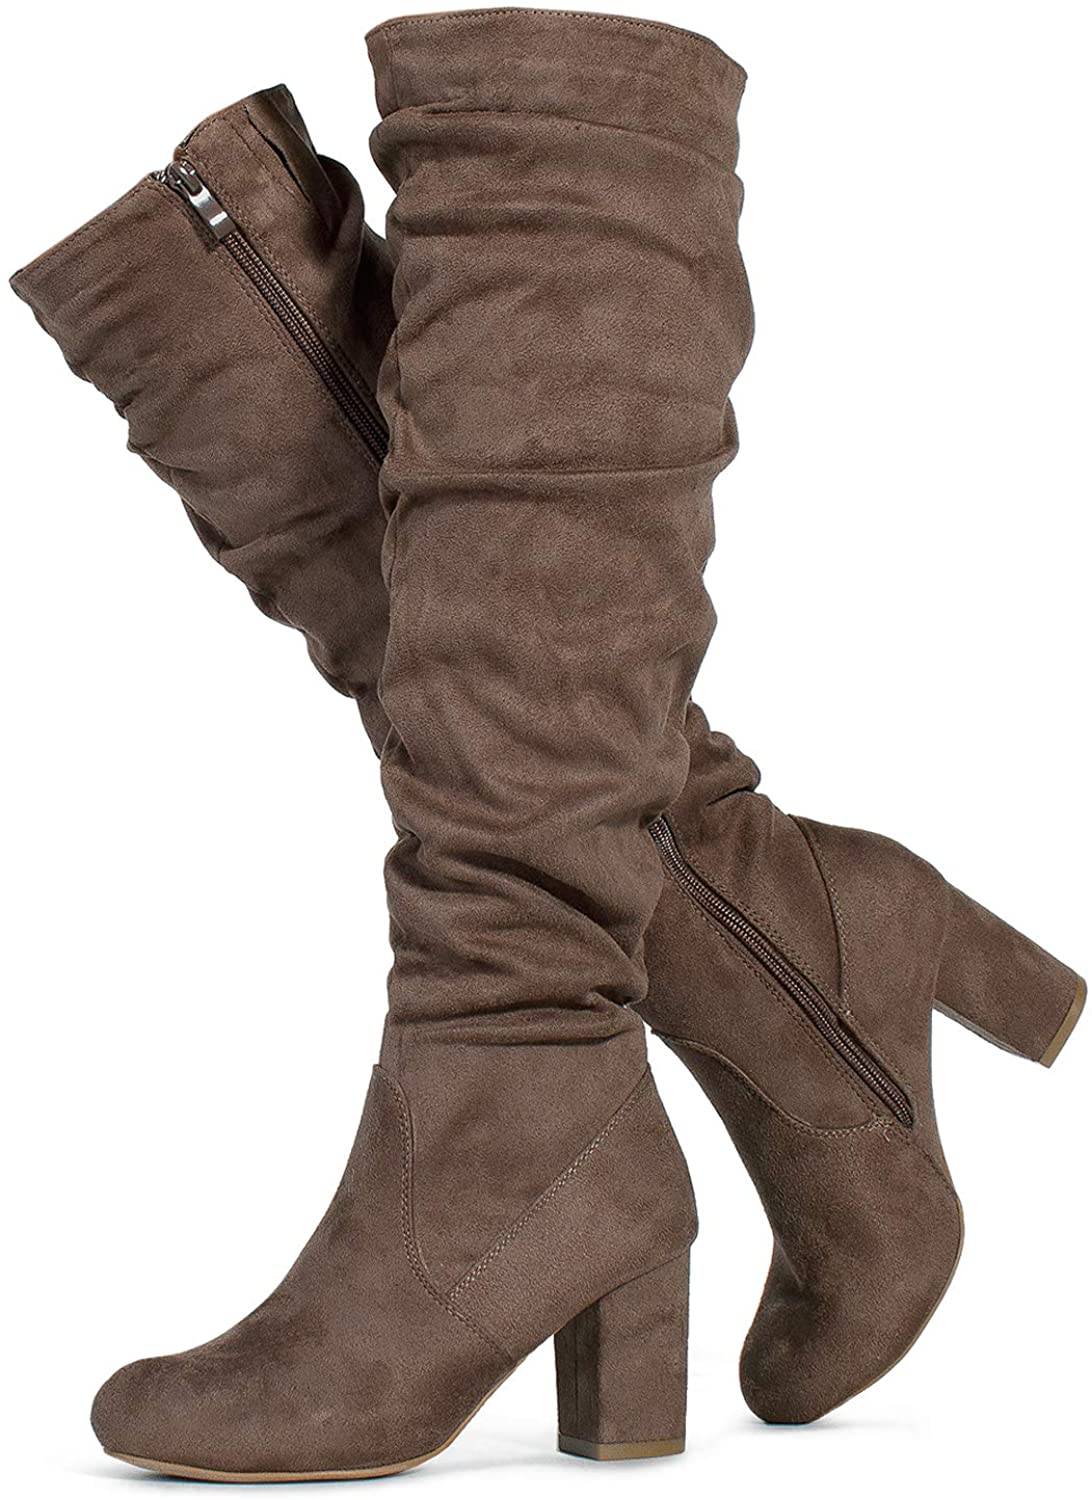 RF ROOM OF FASHION Women's Over The Knee High Slouchy Boots 